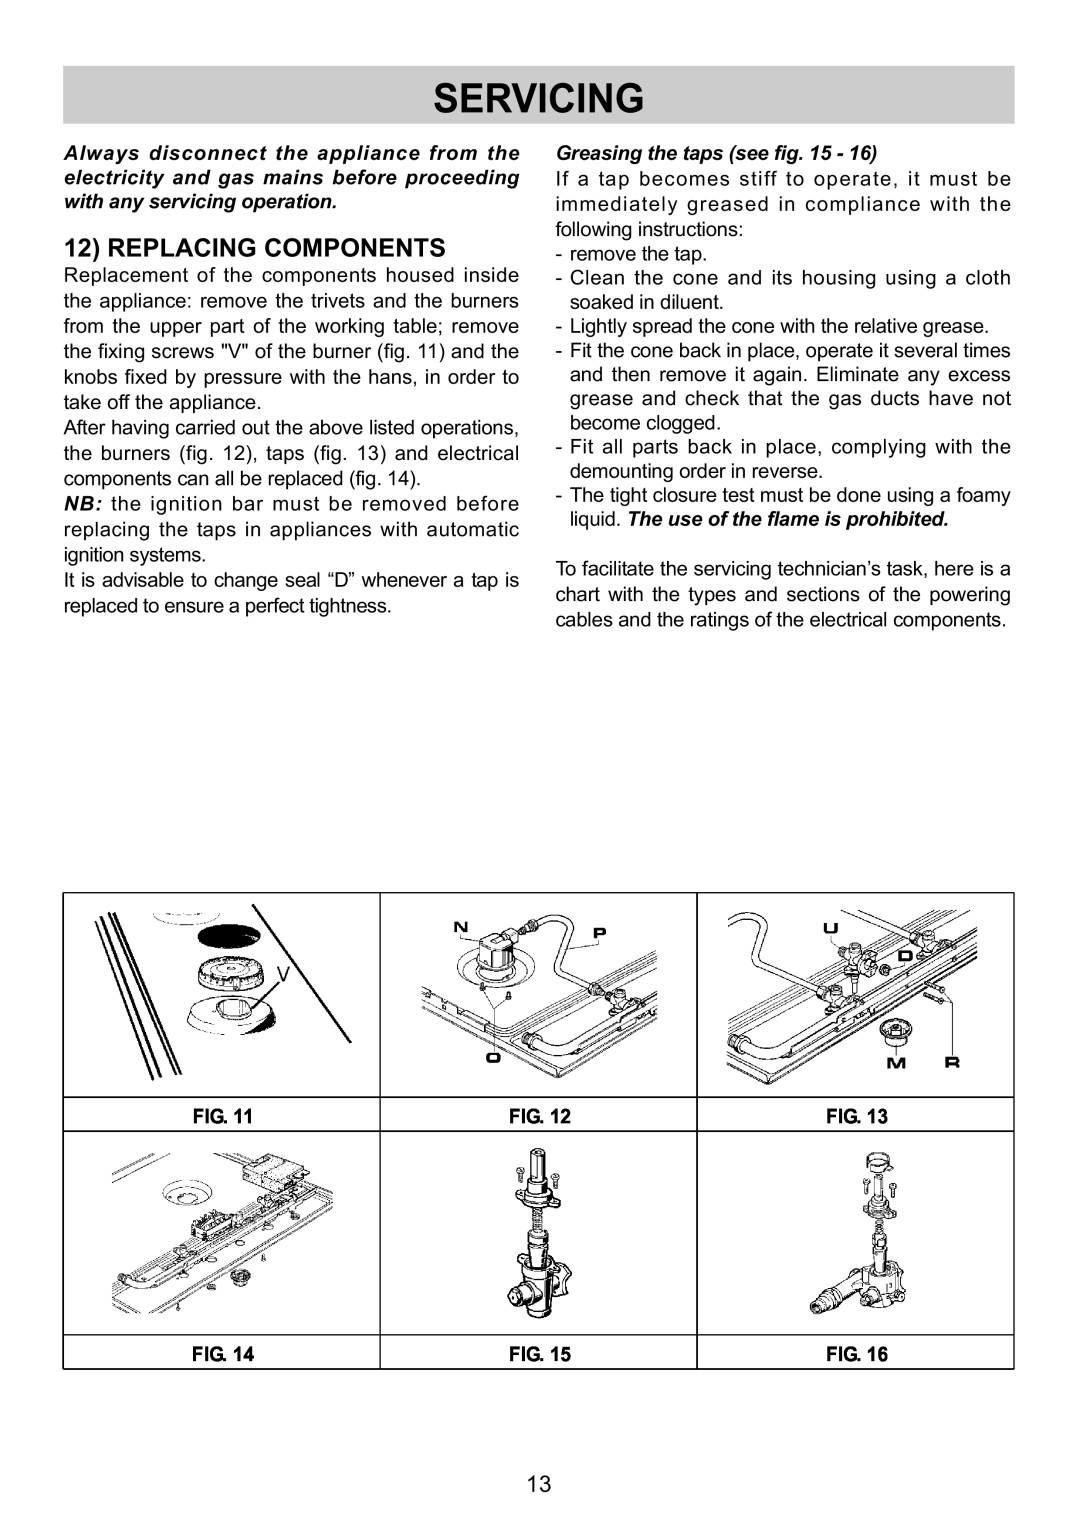 Kuppersbusch USA GMS 9551.0 E-UL, GMS 6540.0 E-UL instruction manual Servicing, Replacing Components 